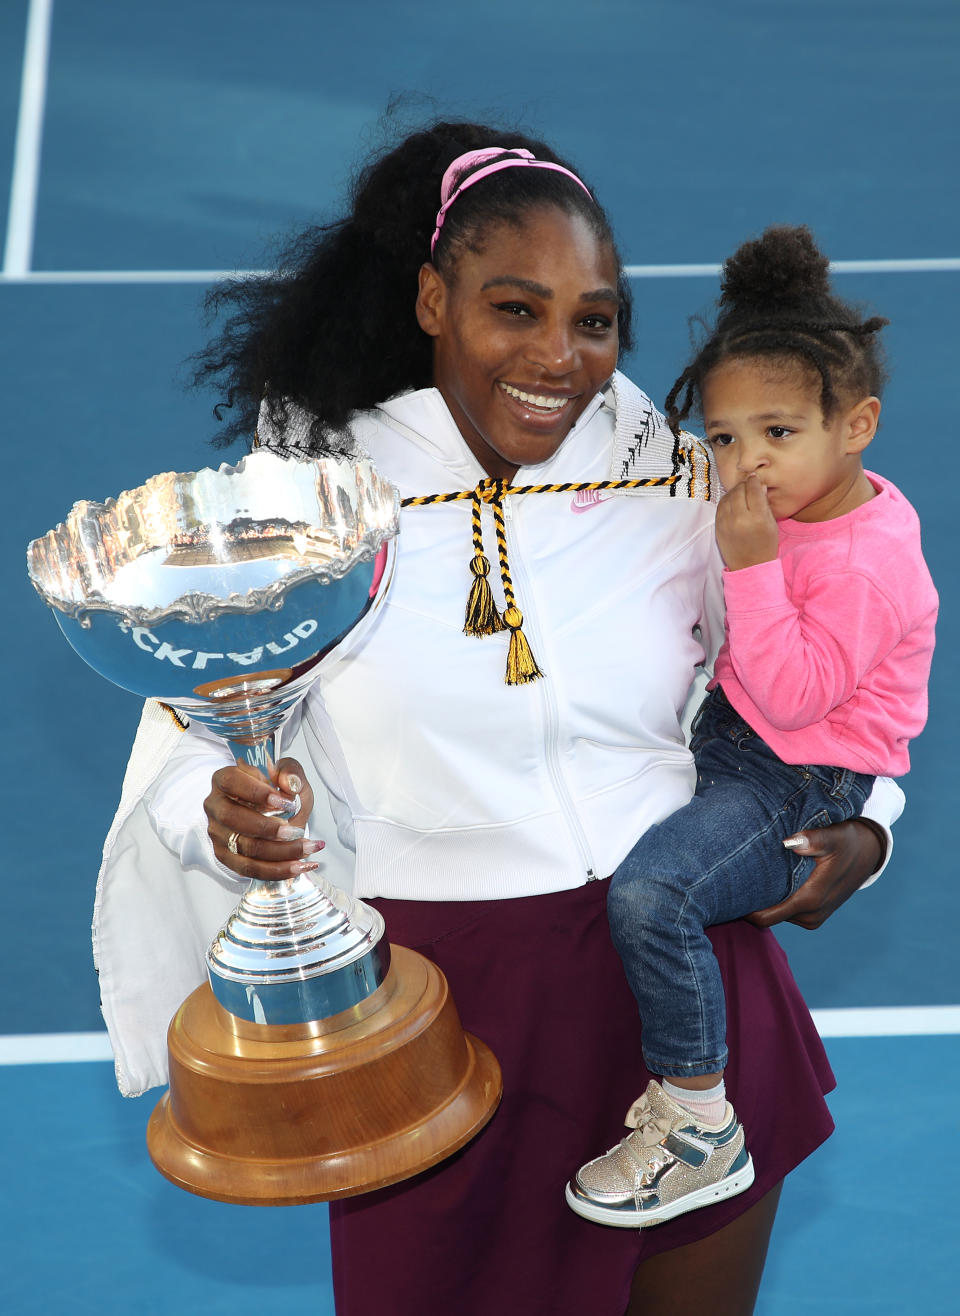 AUCKLAND, NEW ZEALAND - JANUARY 12: Serena Williams of the USA holds her daughter Alexis Olympia with the trophy following the Women's Final between Serena Williams and Jessica Pegula of the USA on day seven of the 2020 Women's ASB Classic at ASB Tennis Centre on January 12, 2020 in Auckland, New Zealand. (Photo by Phil Walter/Getty Images)